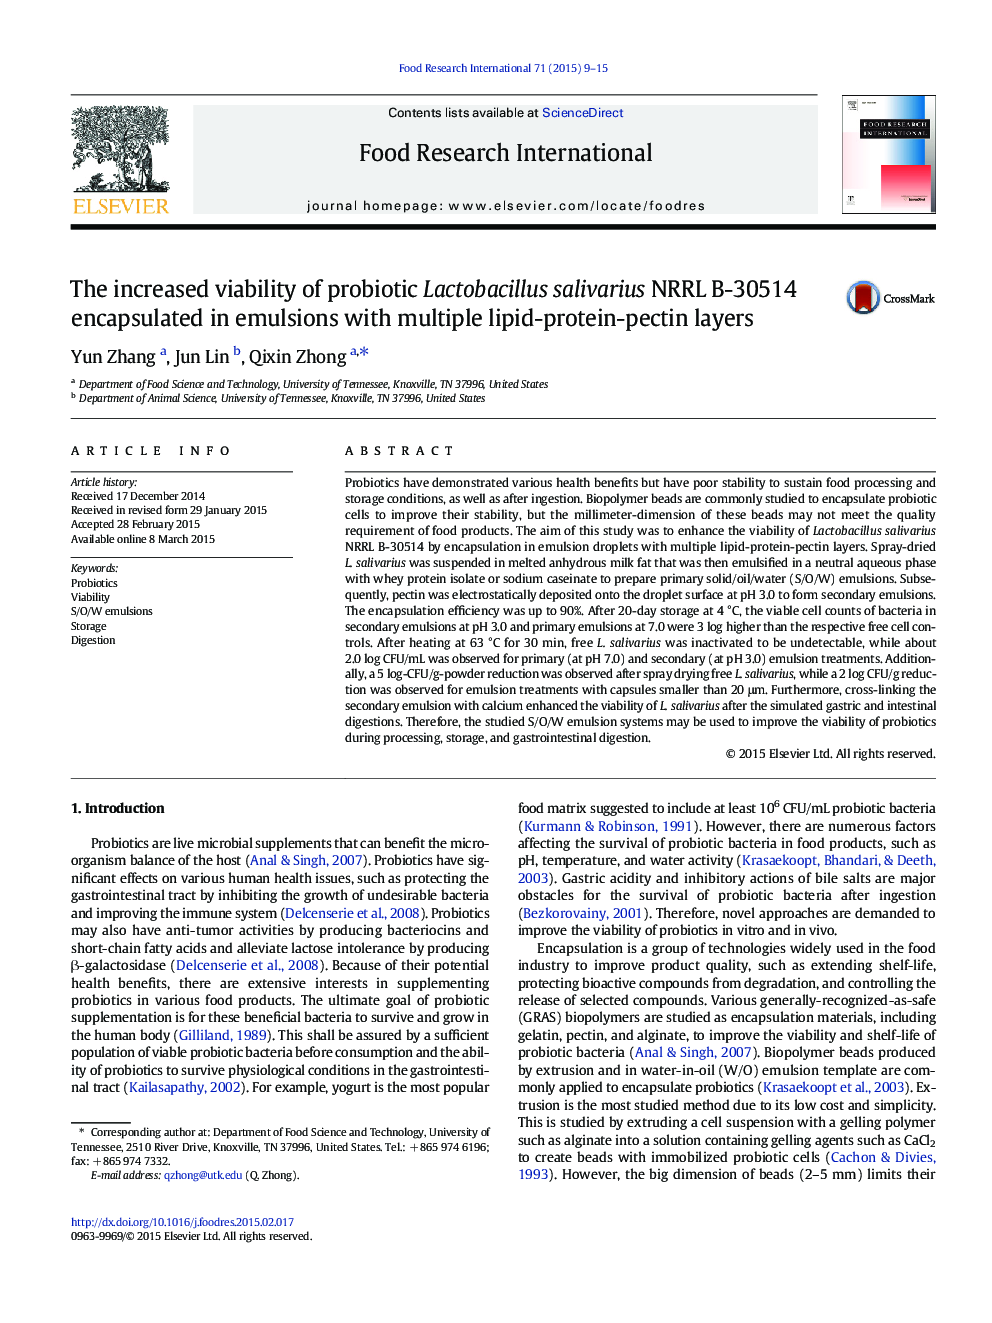 The increased viability of probiotic Lactobacillus salivarius NRRL B-30514 encapsulated in emulsions with multiple lipid-protein-pectin layers